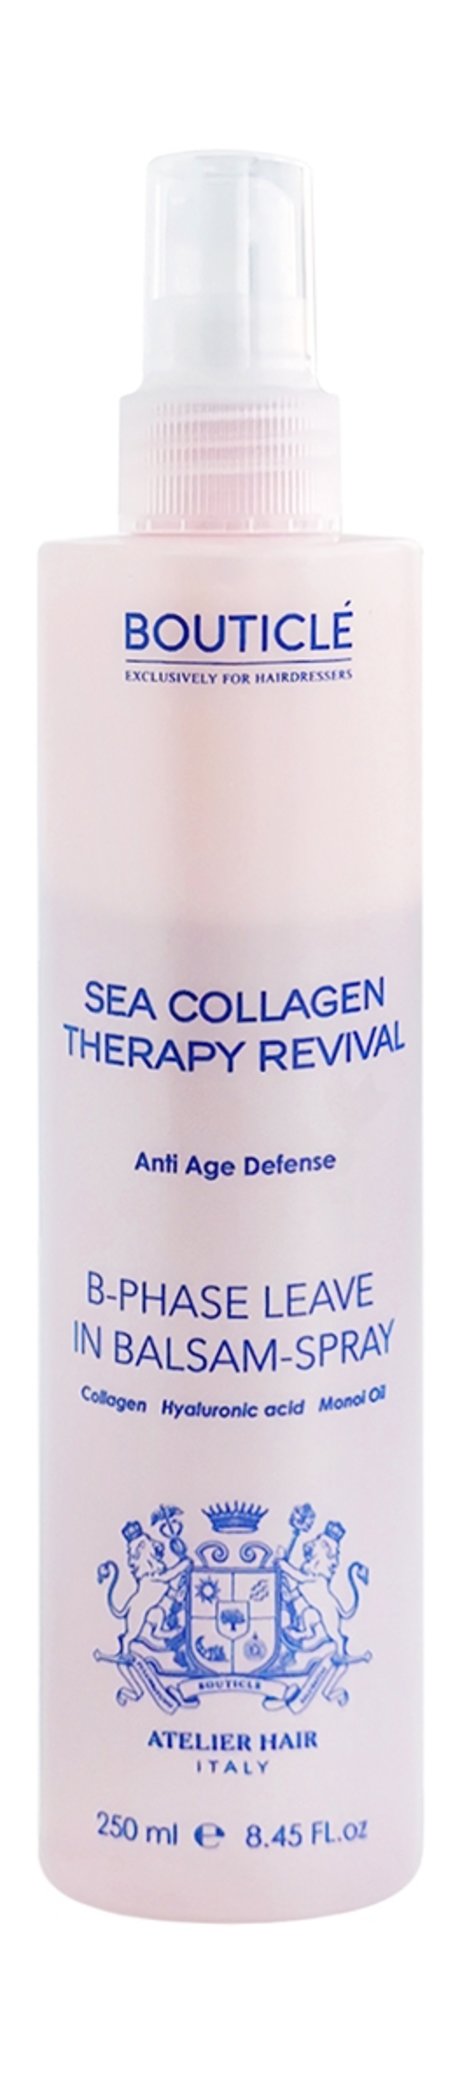 bouticle sea collagen therapy revival b-phase balsam-spray